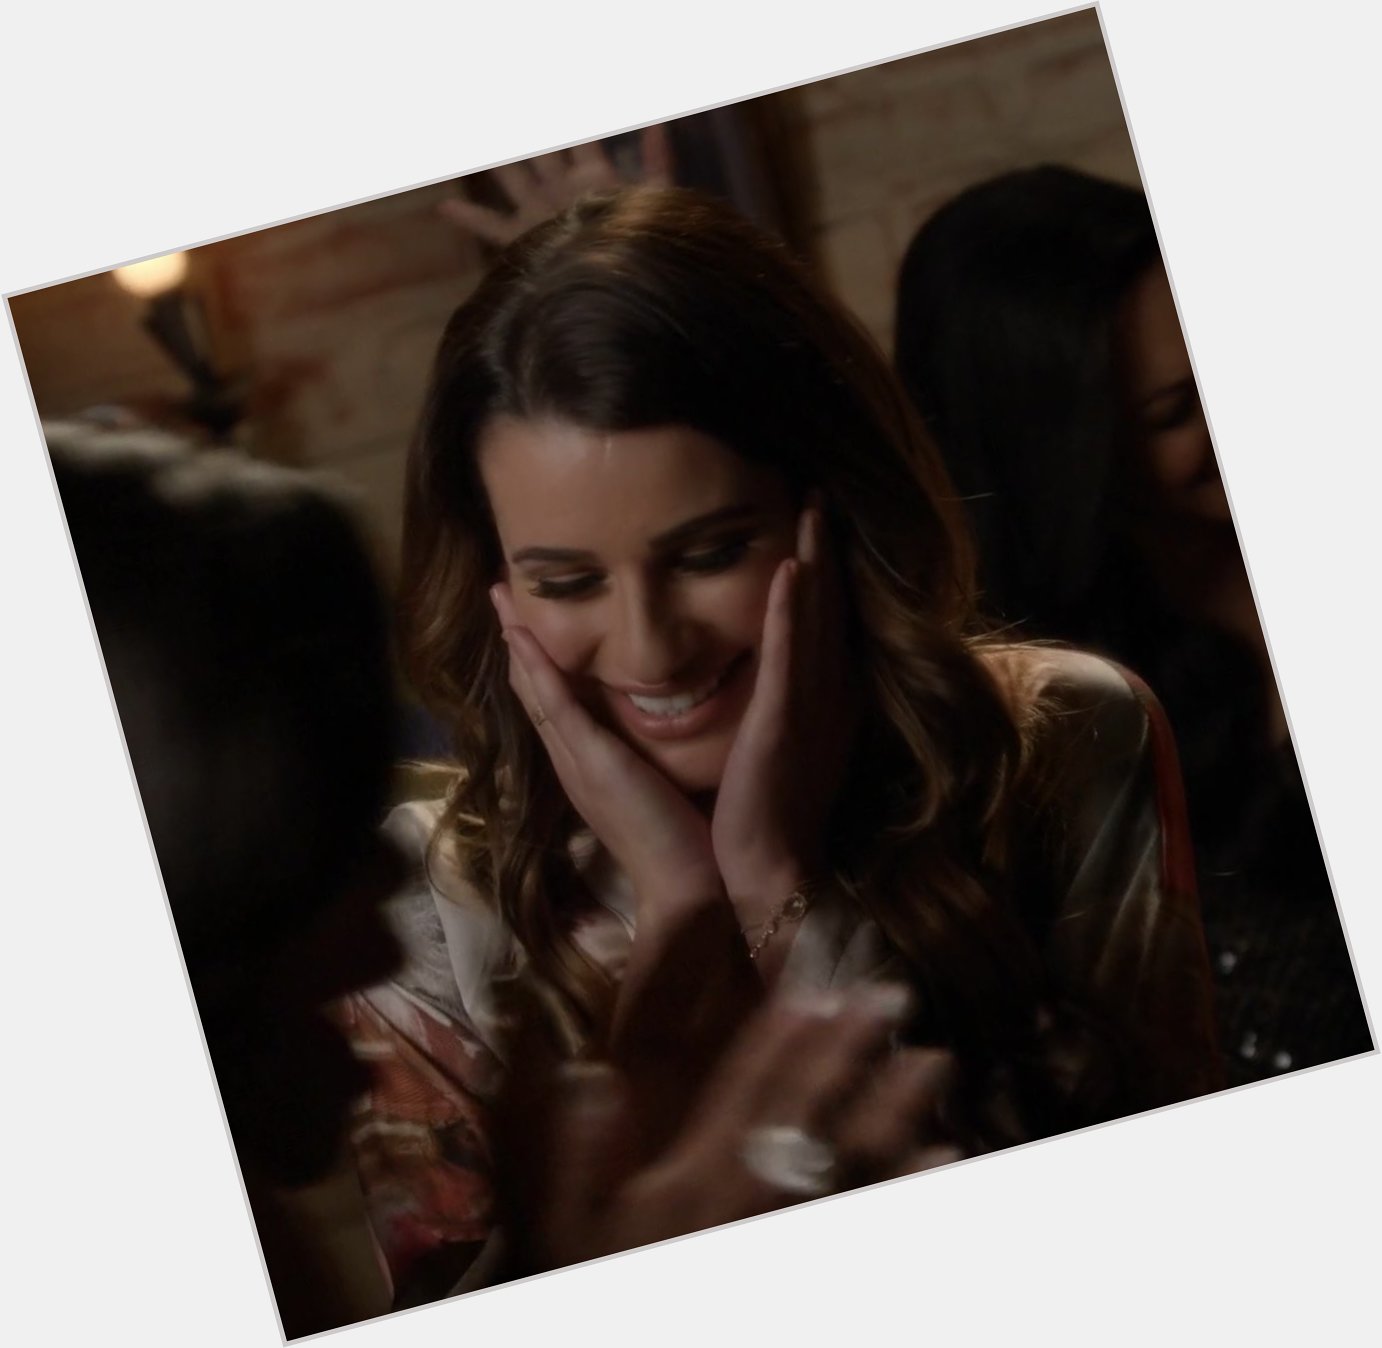 Happy birthday rachel berry the light of my life i hope she is having the best day whever she is <33 